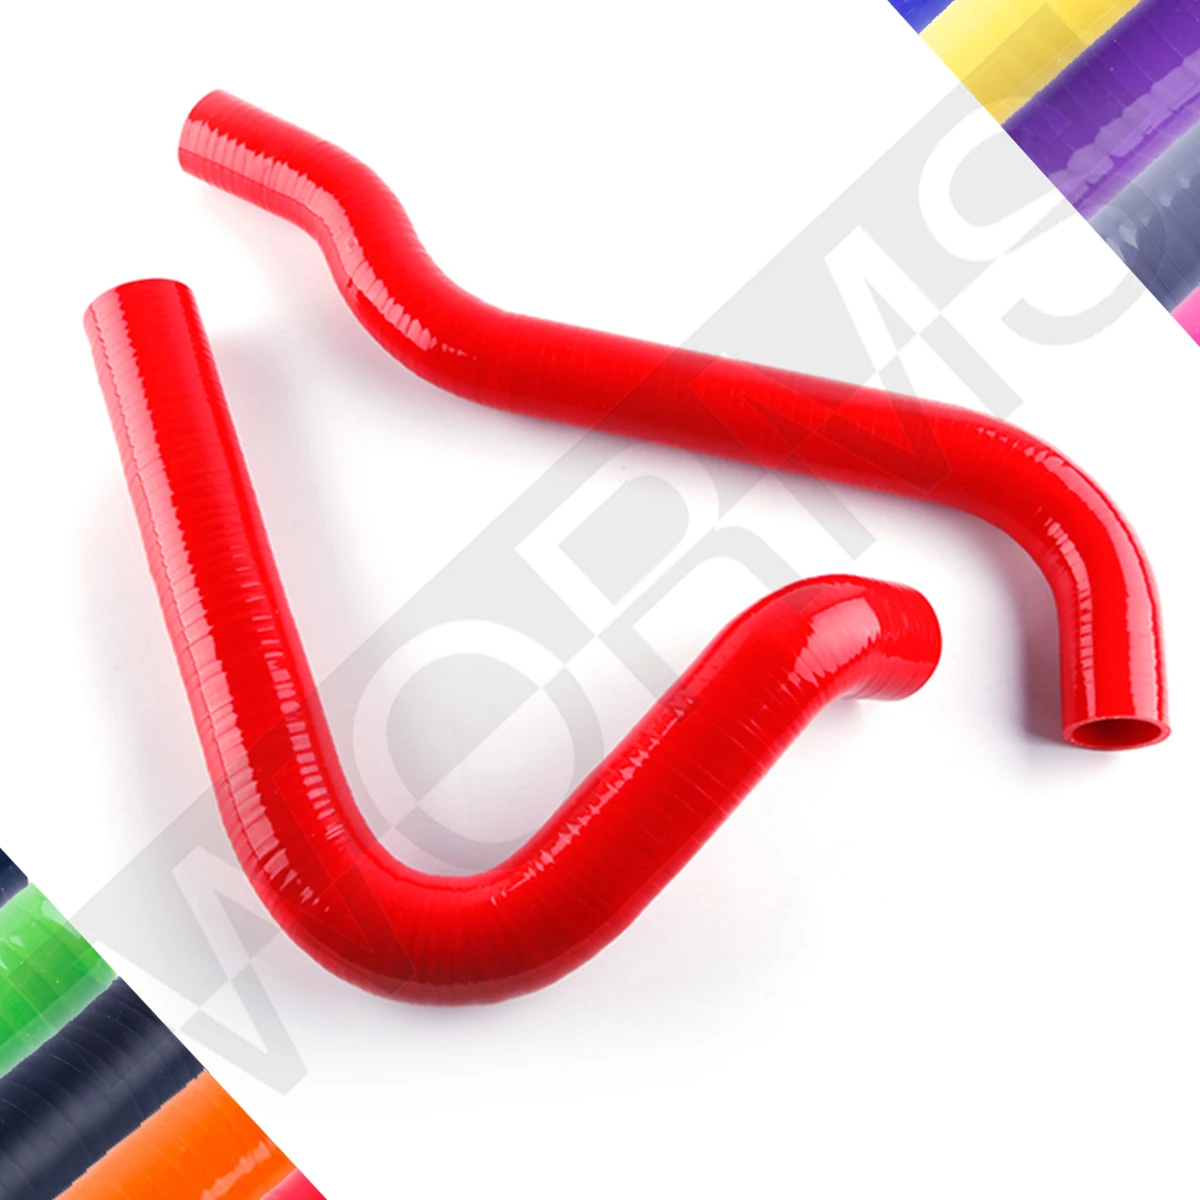 

For Chevrolet Chevy C K Series C10 Pickup 1967-1972 1968 1969 1970 1971 Silicone Radiator Hose Pipe Kit